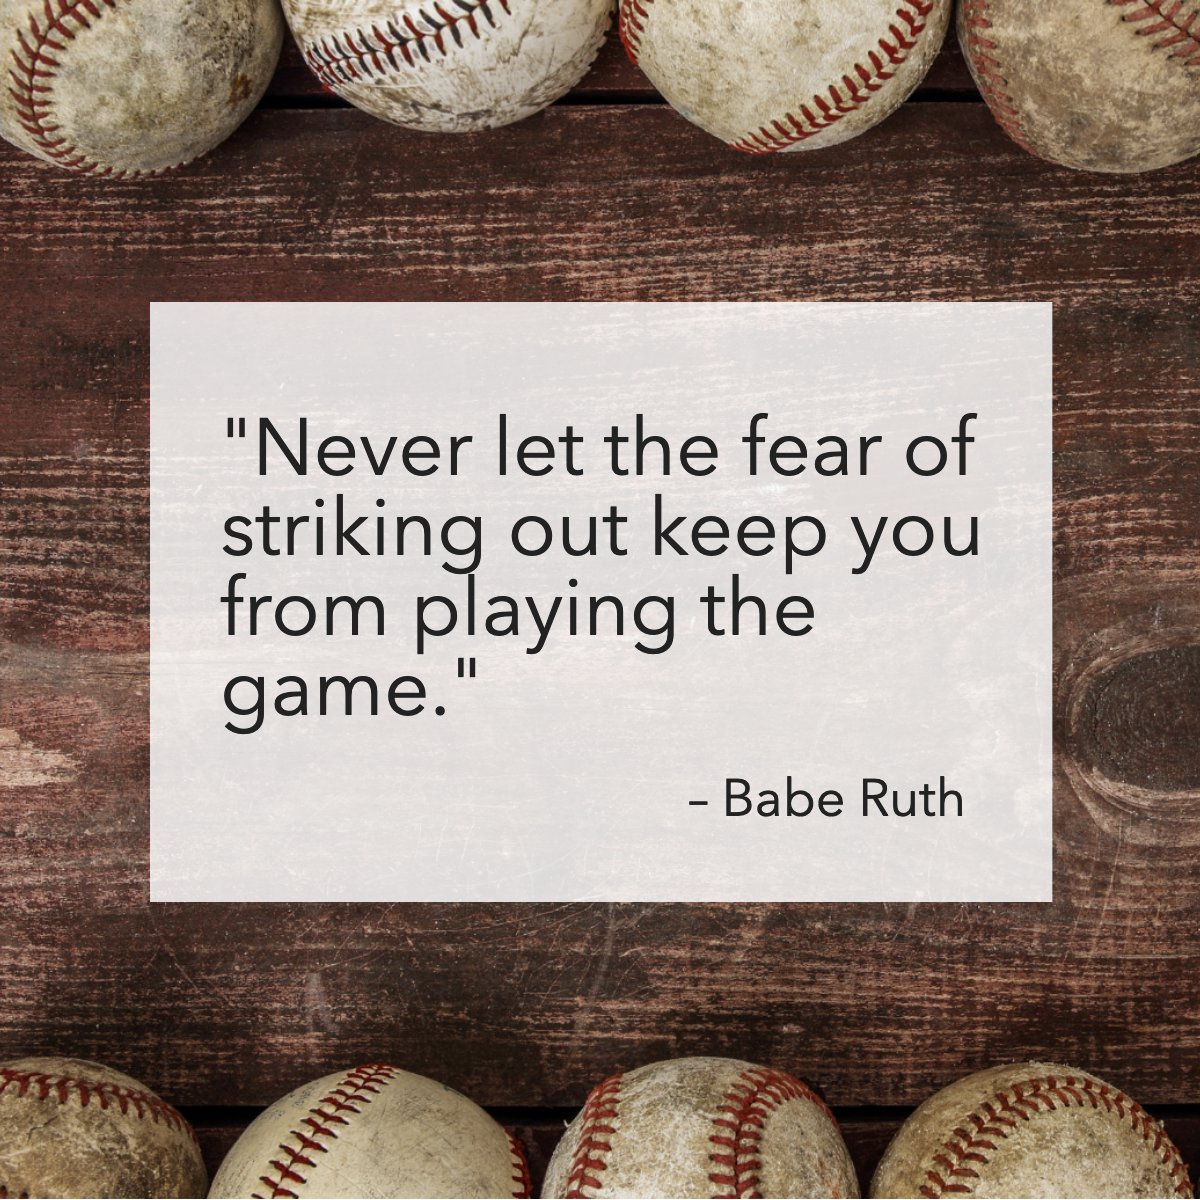 I guess we just have to keep playing! 🙏

Share with us a motivational quote! 💭

#inspiring #motivation #sports #baseball #baberuth #quote
 #lasvegasrealtor #lasvegasrealestate #sparrowsells #lasvegashomes #realestate #vegasbaby #realtorlife #speaknsparrow #justsold